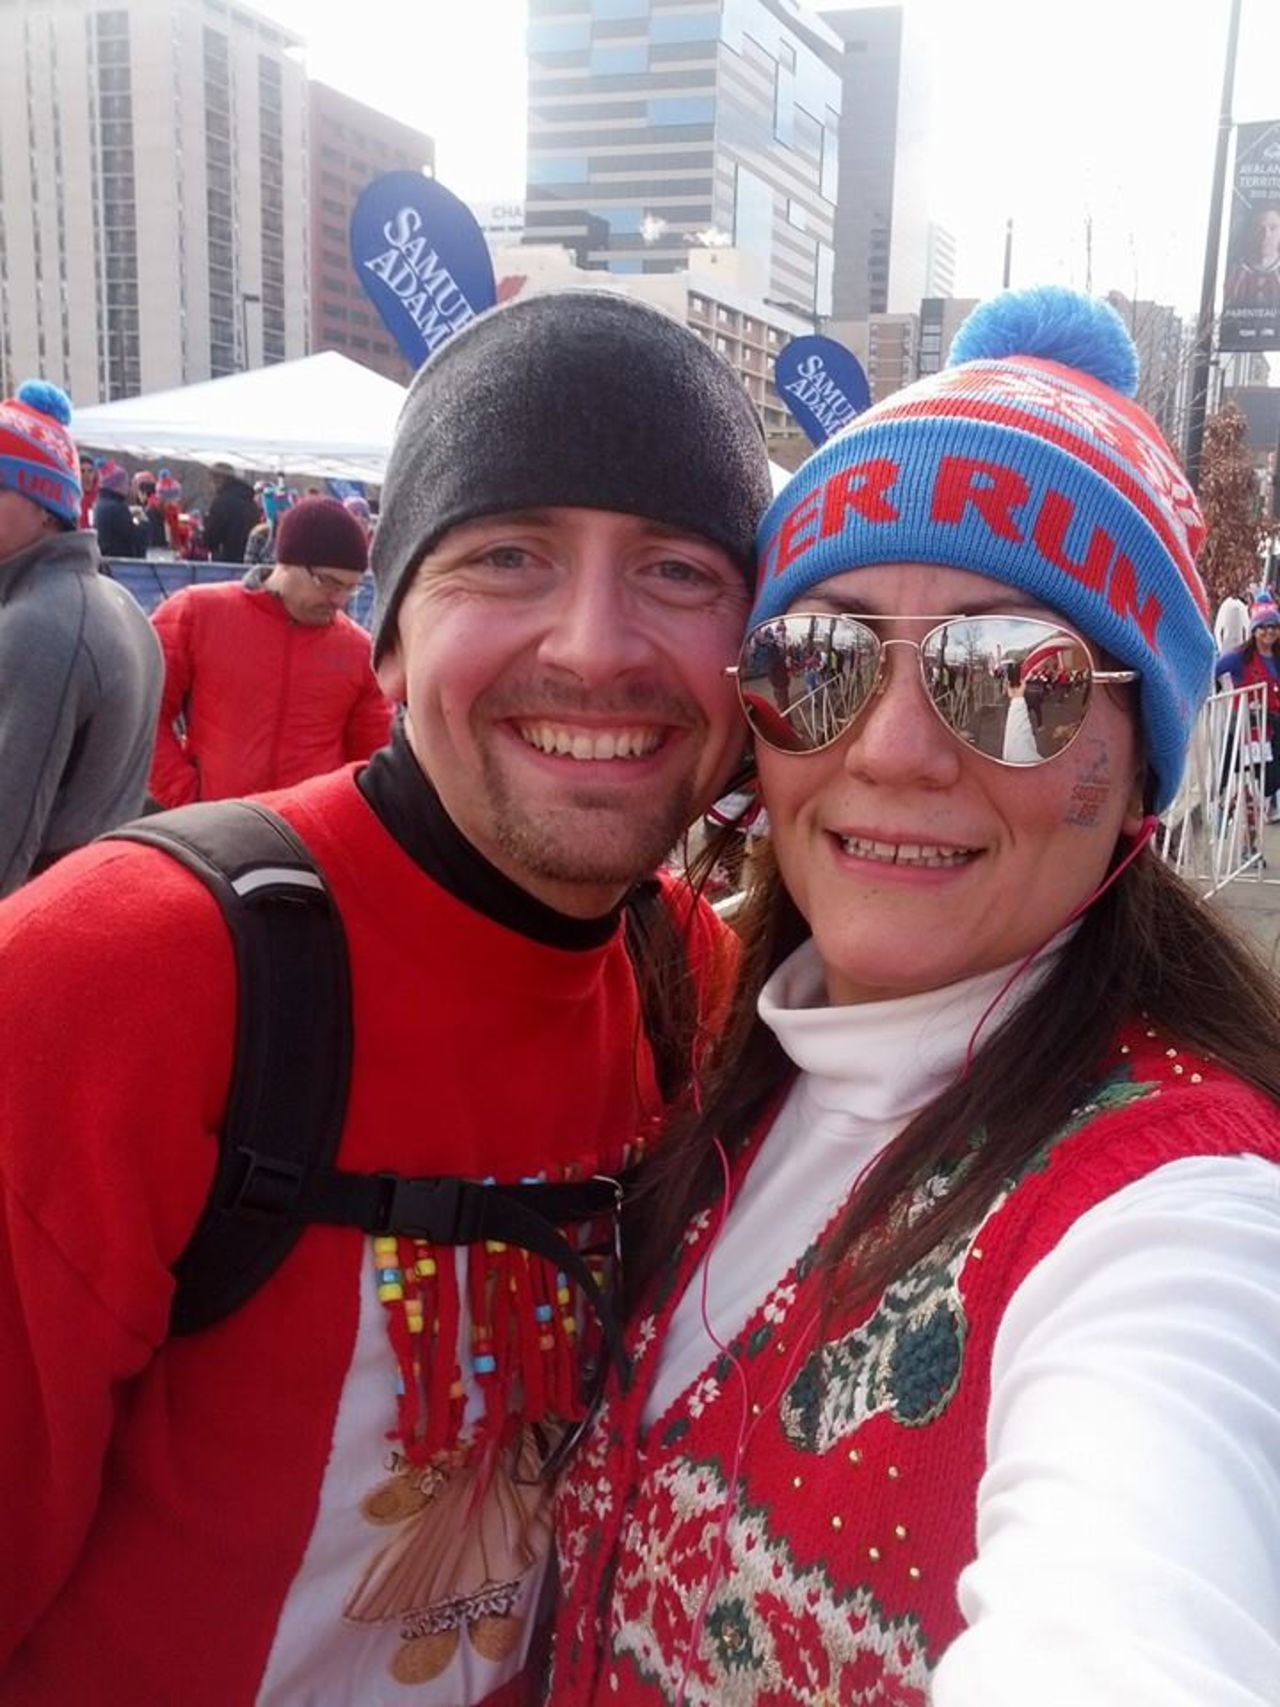 Rob and Jess ran the "Ugly Sweater Run" again in December 2013. Rob improved on the previous year's results by nearly 14 minutes. He was down by 140 pounds at that point.